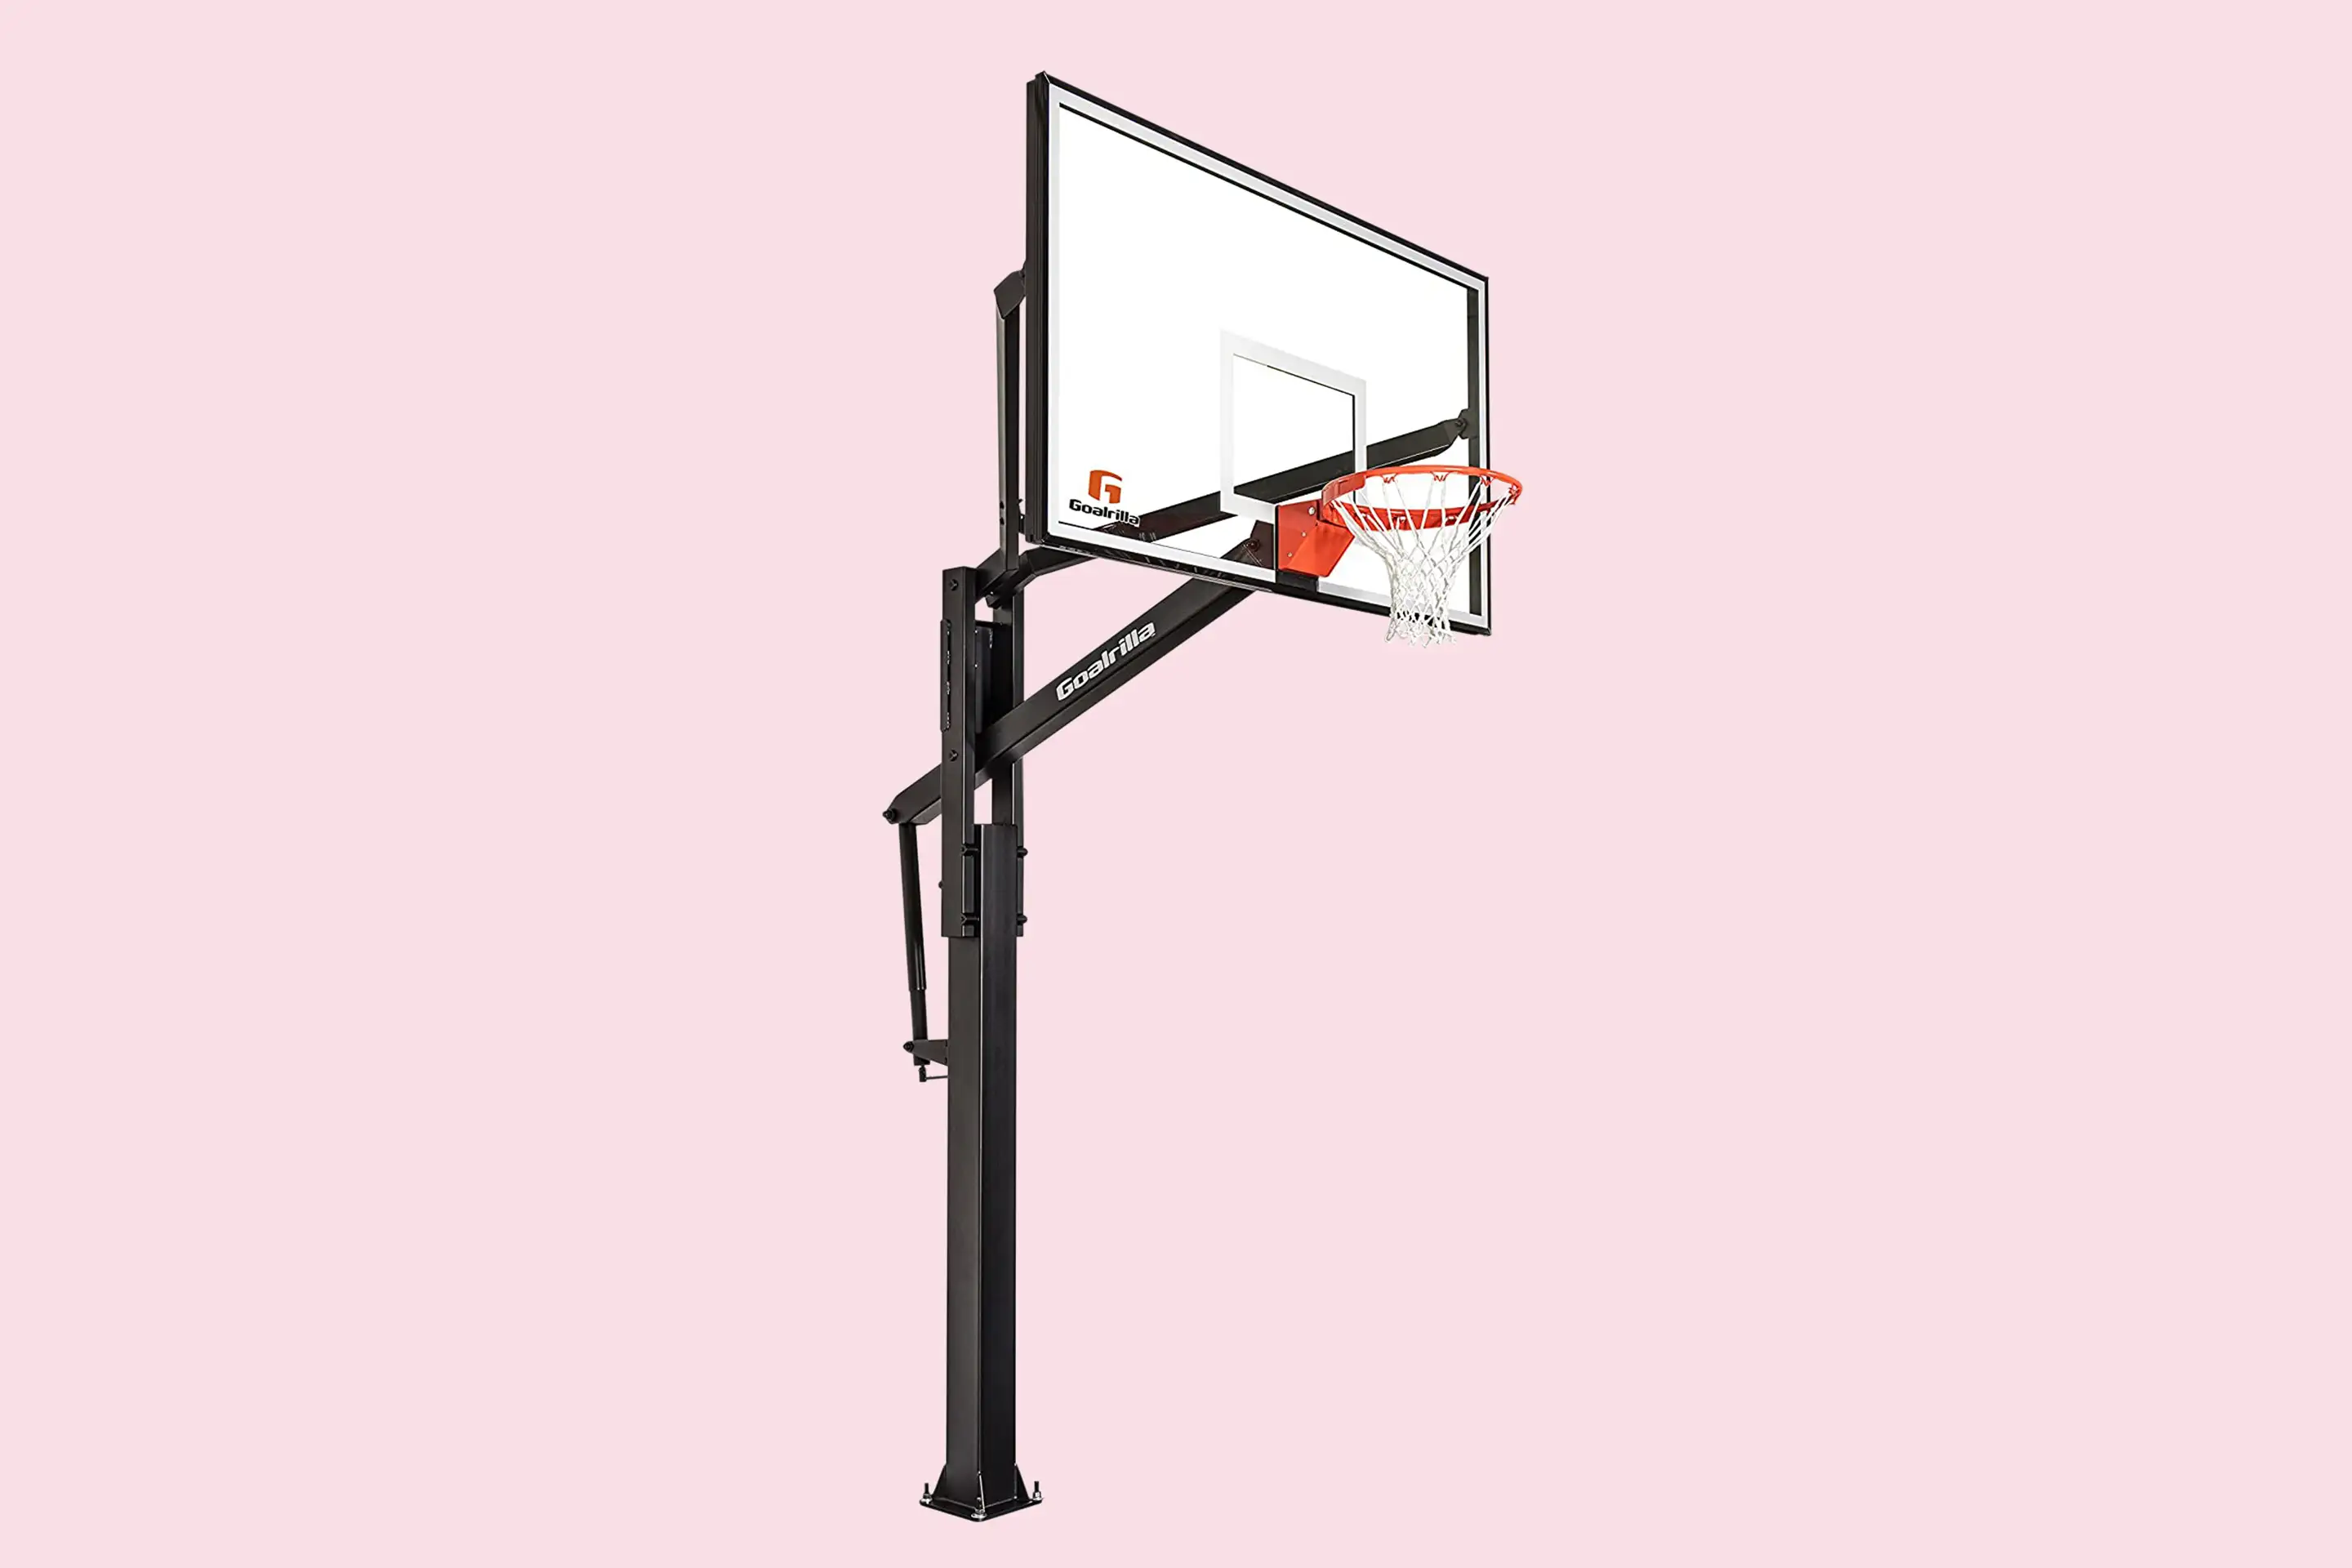 Goalrilla FT Series Basketball Hoops with Tempered Glass Backboard